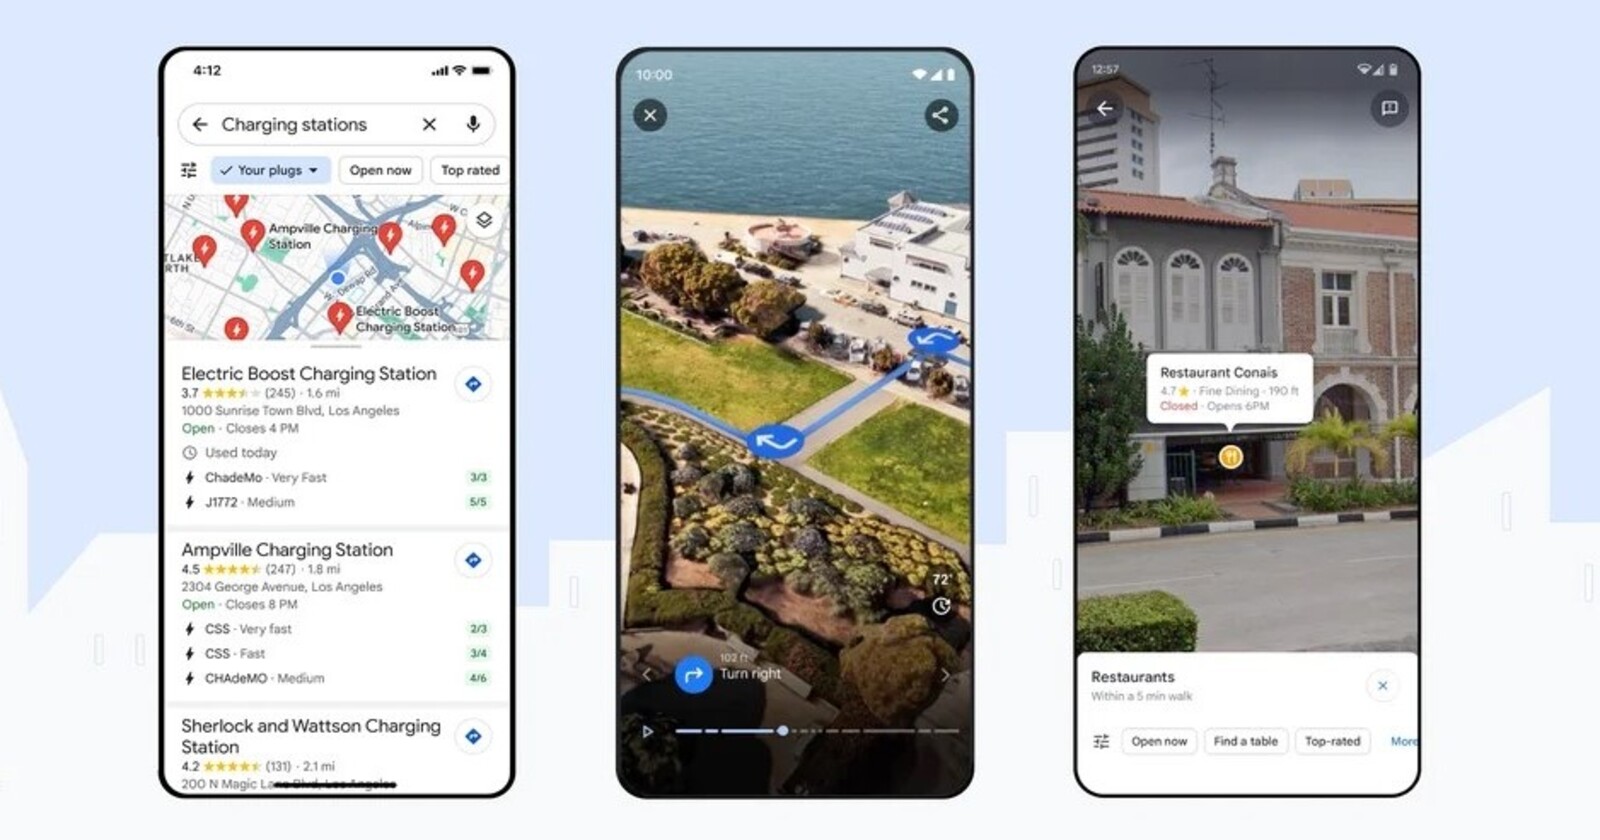 You will soon spot 3D buildings in Google Maps while navigating on your Pixels devices